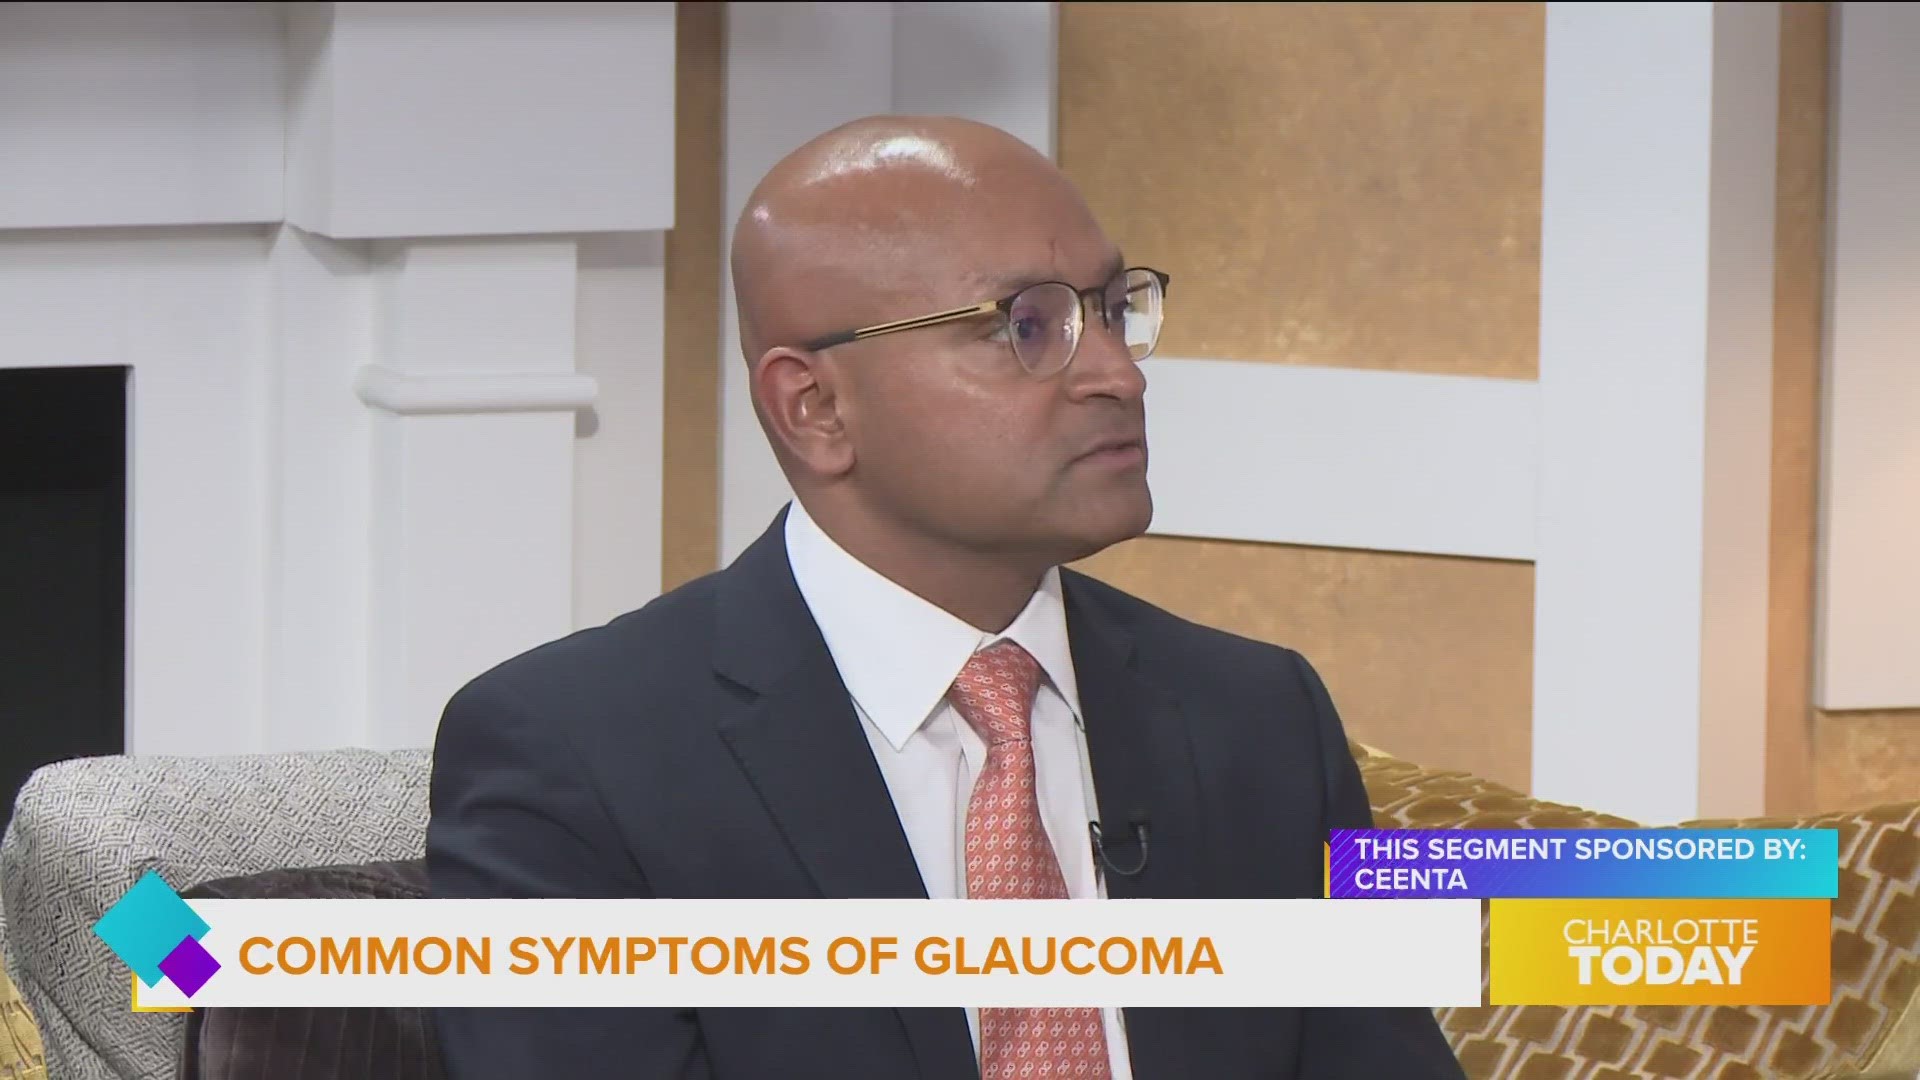 Glaucoma is a disease of the optic nerve